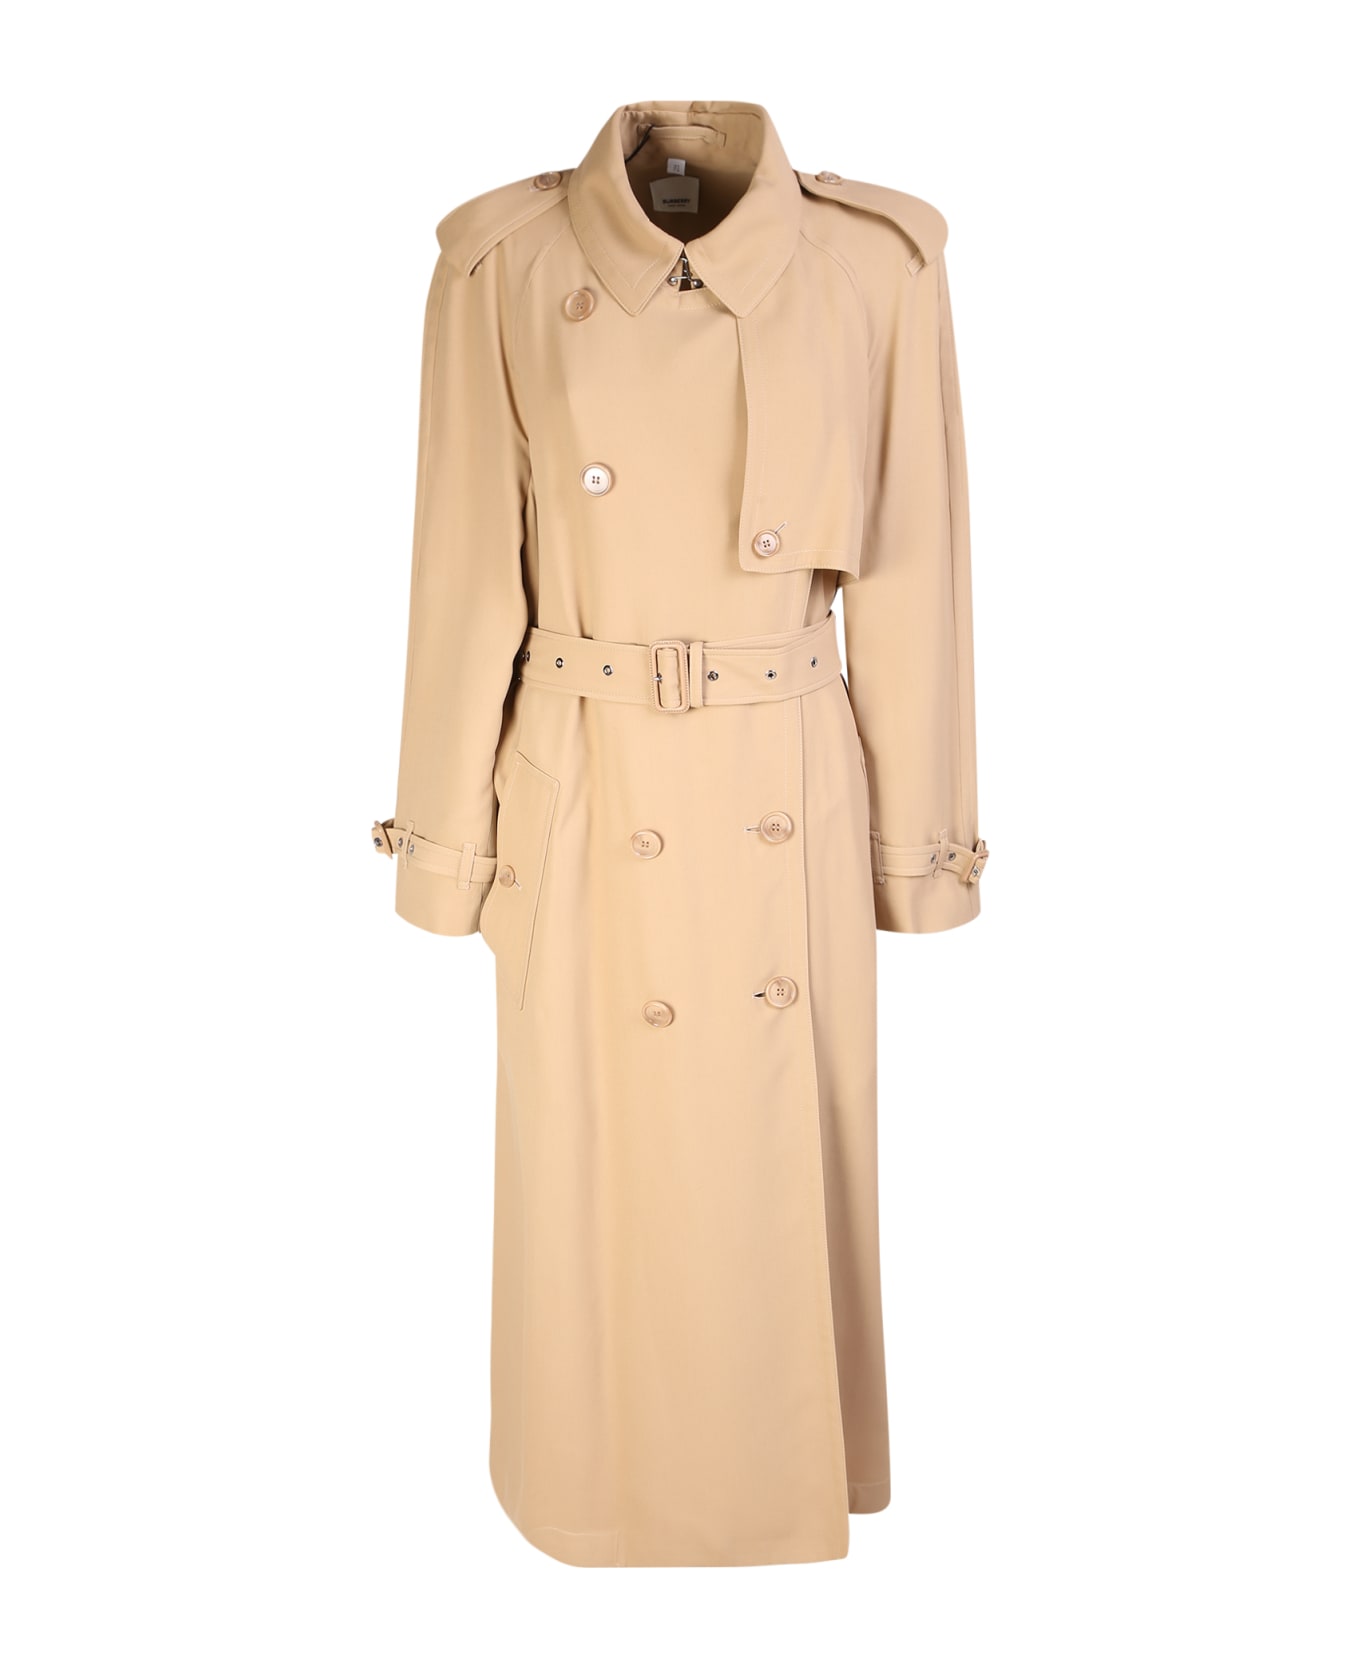 Burberry Double-breasted Trench Coat Beige - Beige